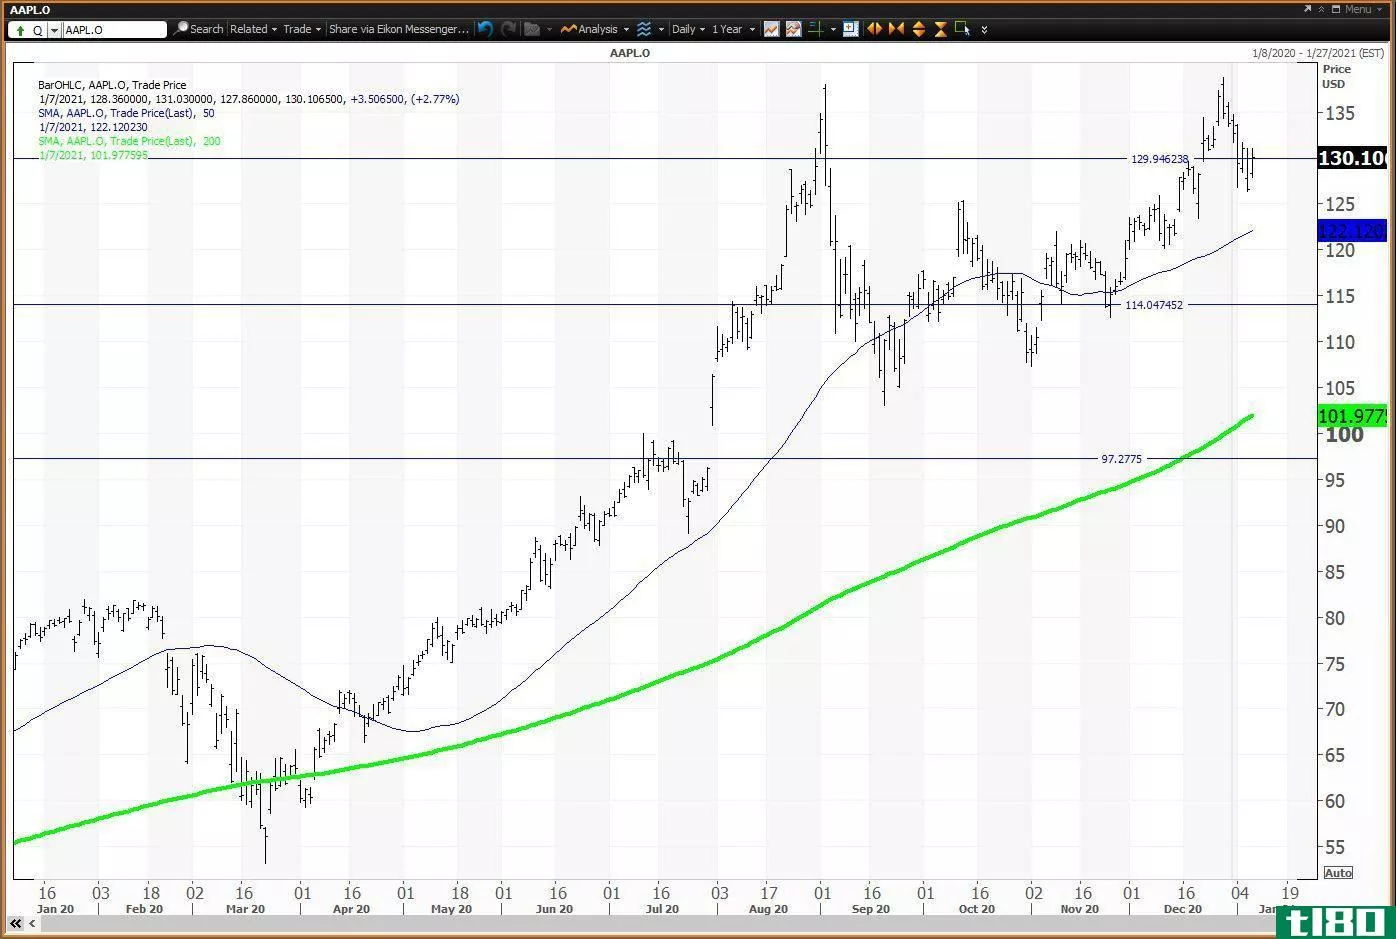 Daily chart showing the share price performance of Apple Inc (AAPL)